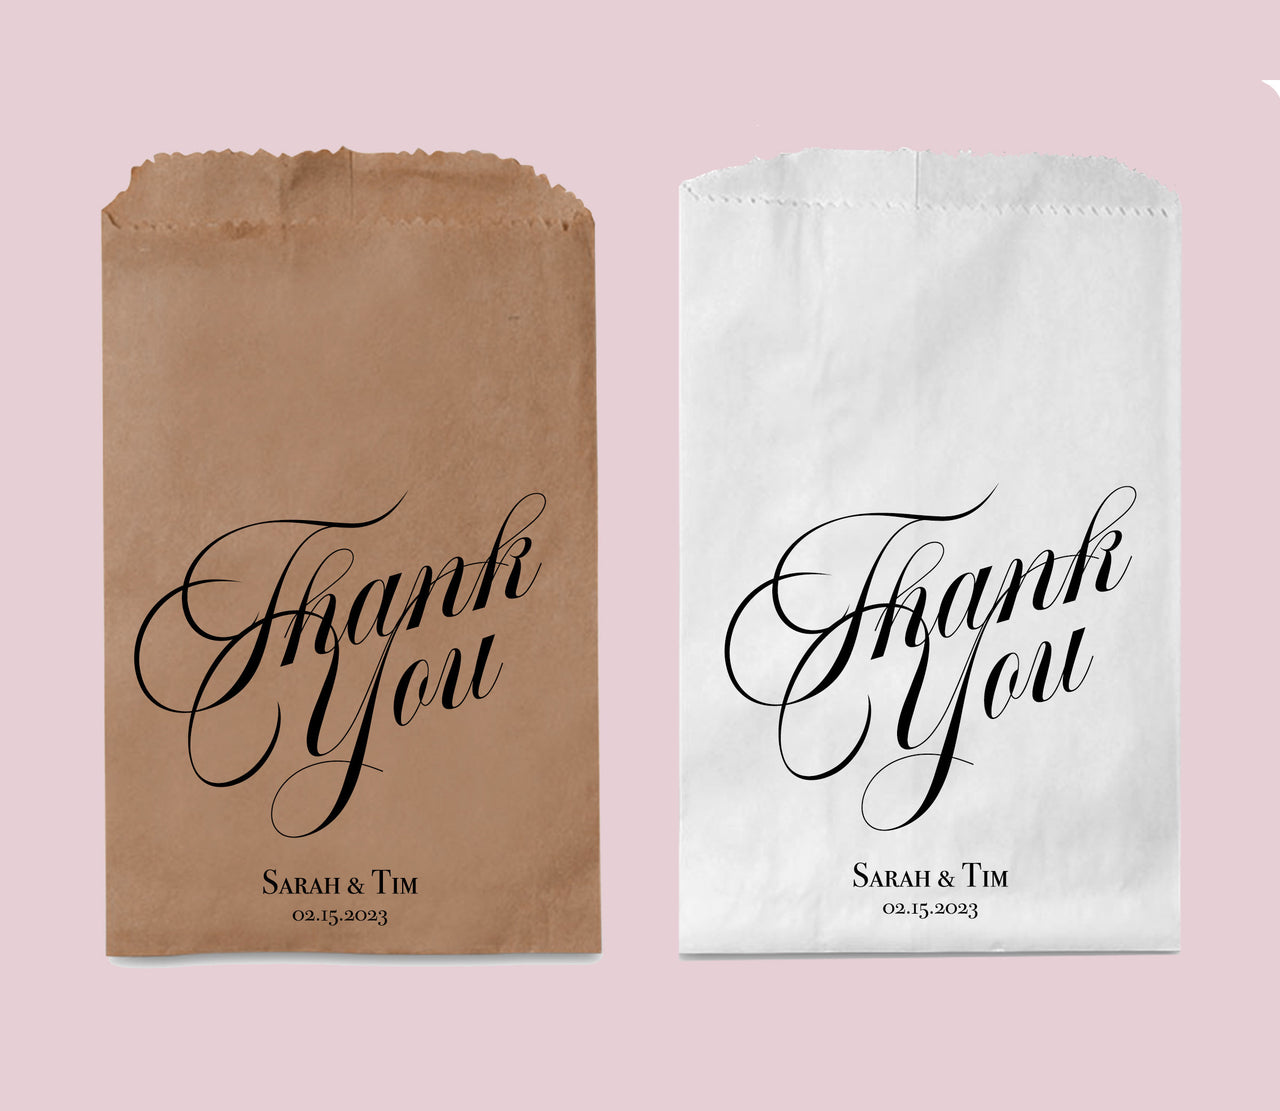 Thank You bags, Wedding Favor Bags, Personalized Treat Bags, Candy Bar Bags, Goodie Bags